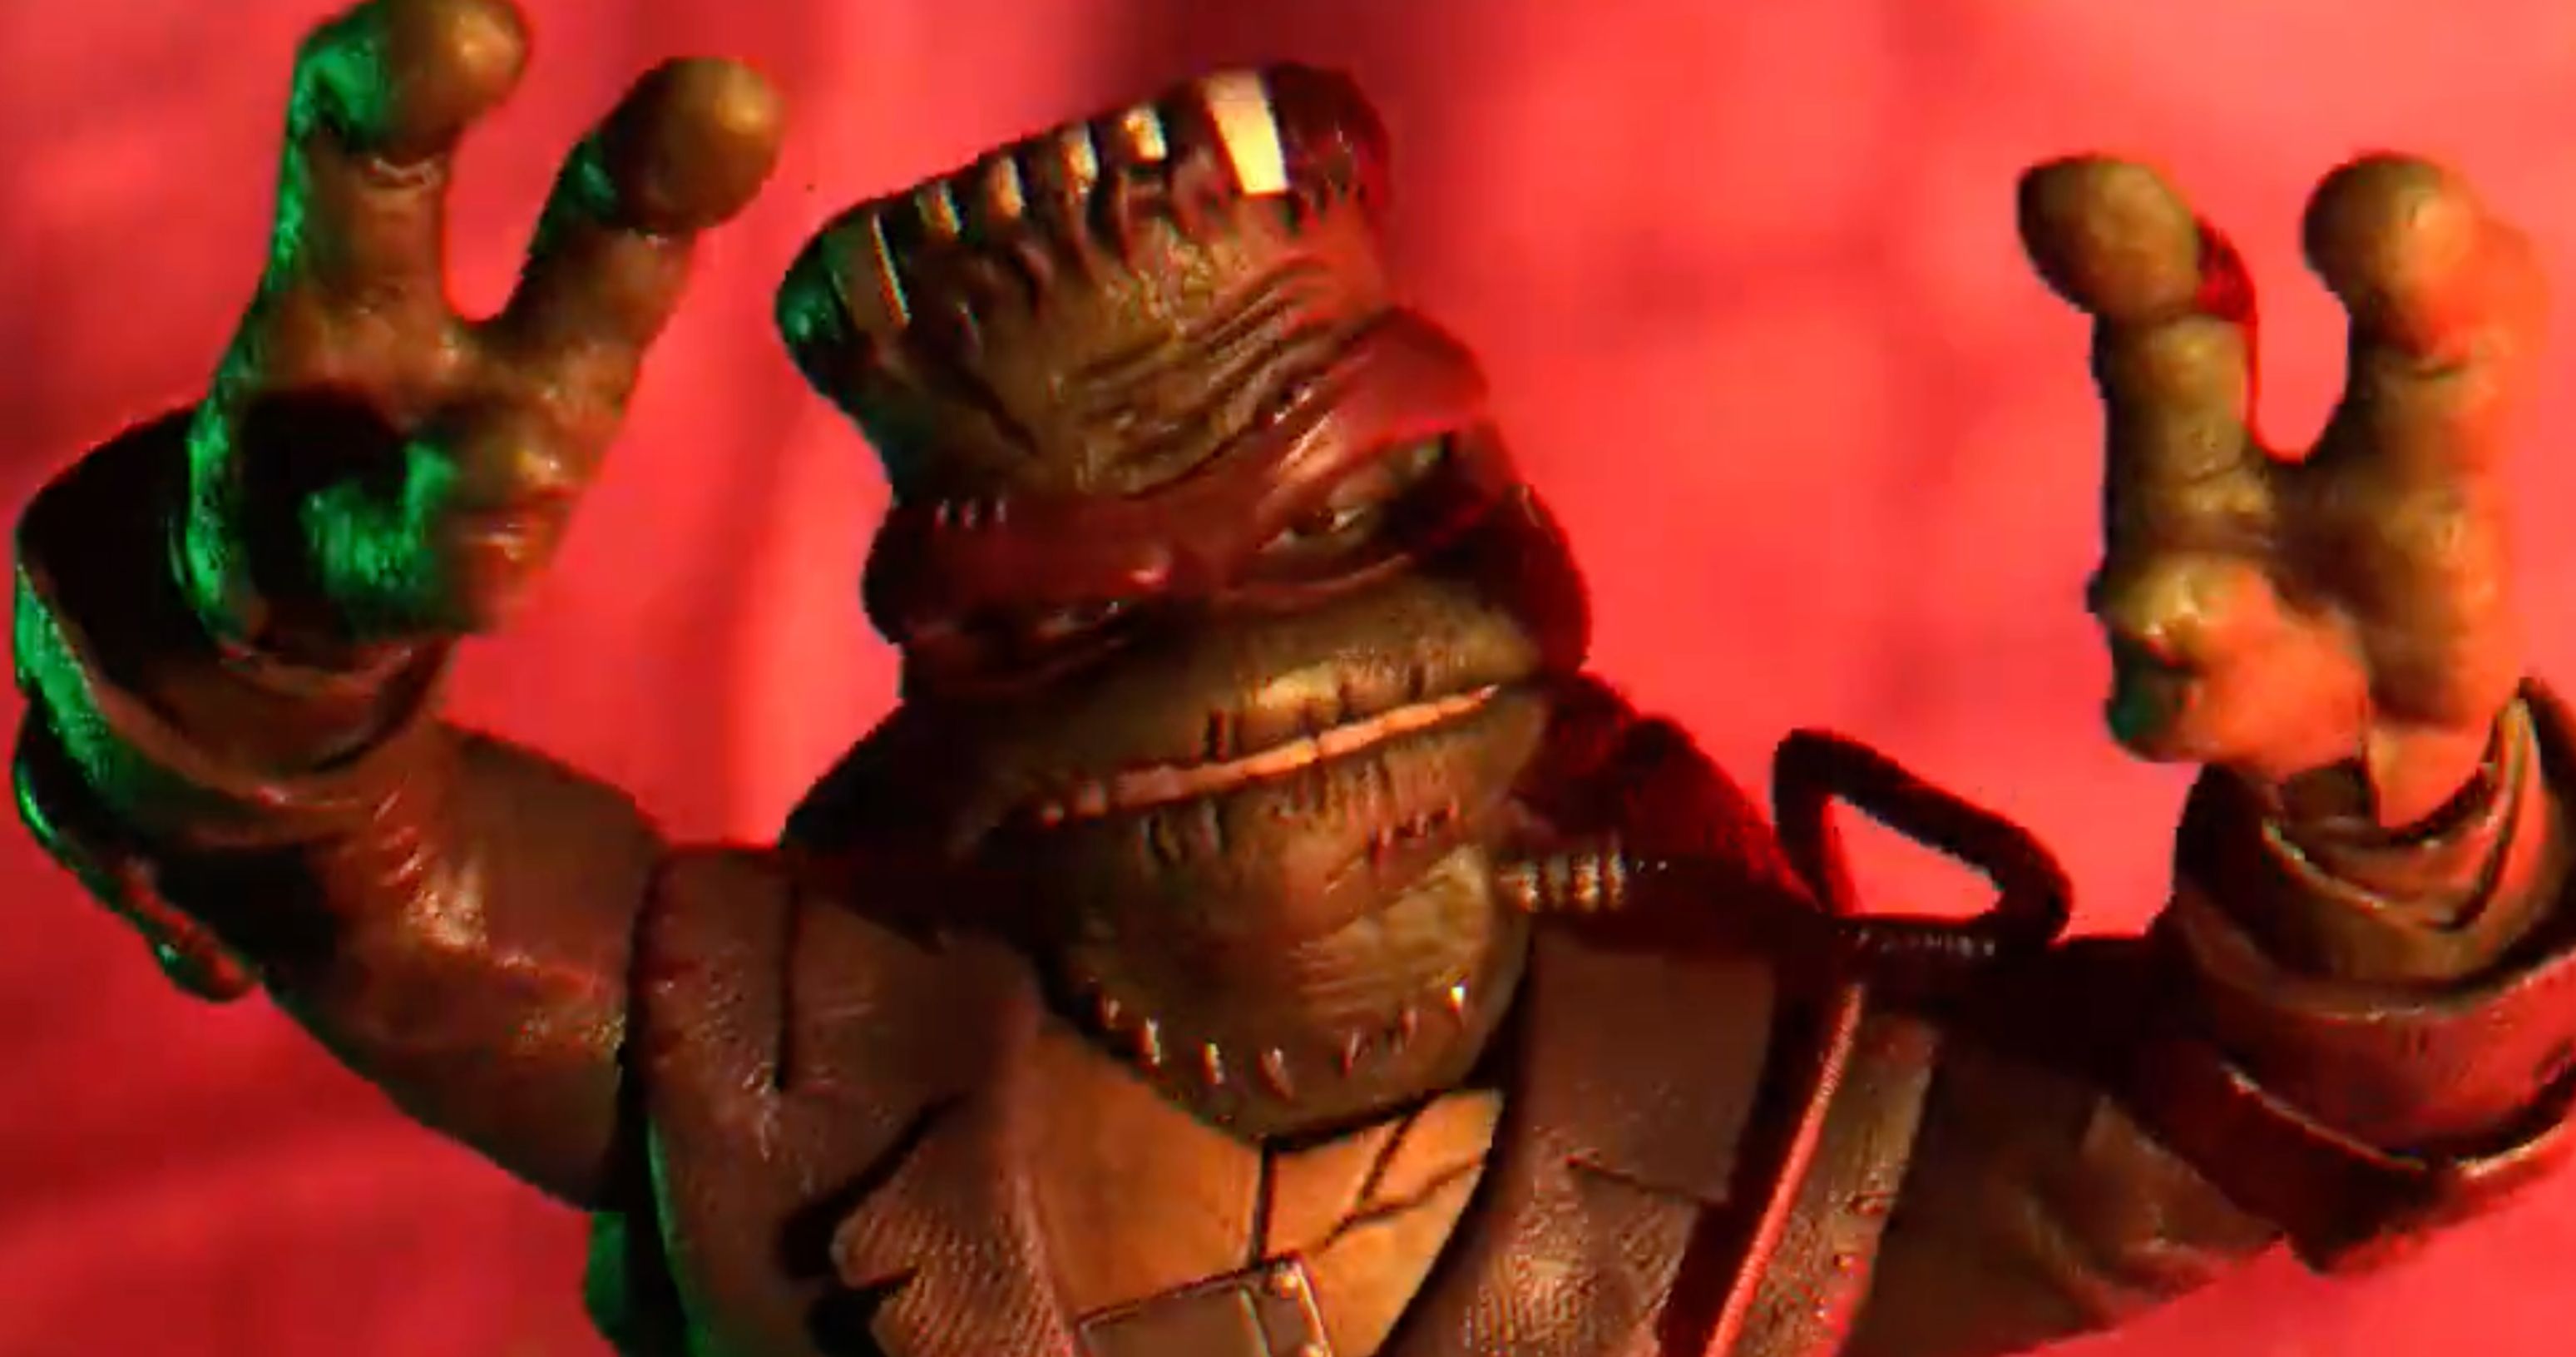 Ninja Turtles and Universal Monsters Mash-Up for the Ultimate NECA Halloween Toy Release